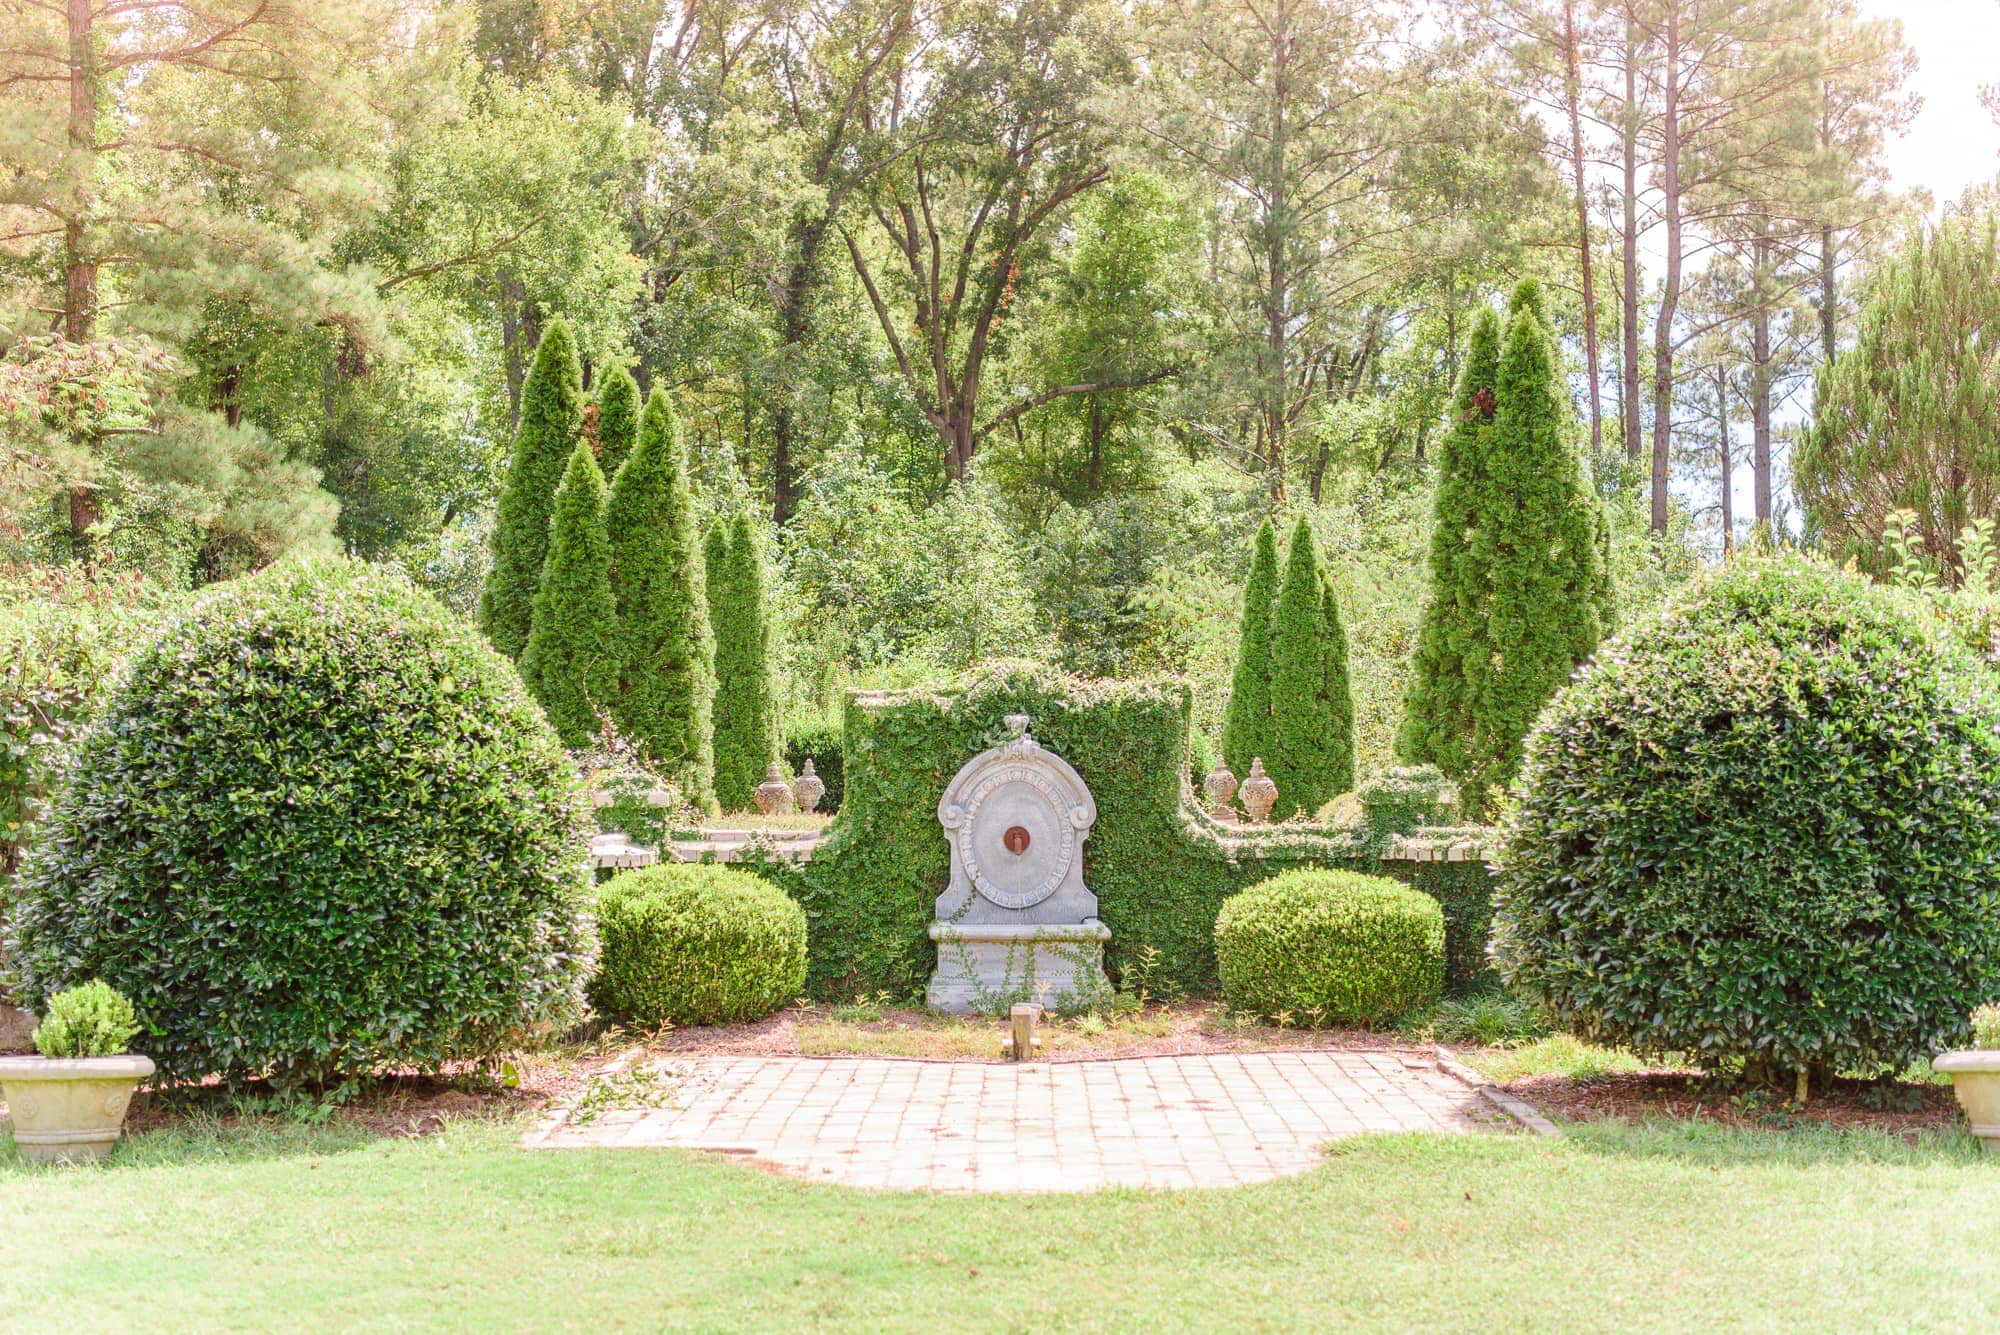 This is the garden view behind the maze at the Key Rose Estate wedding venue in North Carolina.